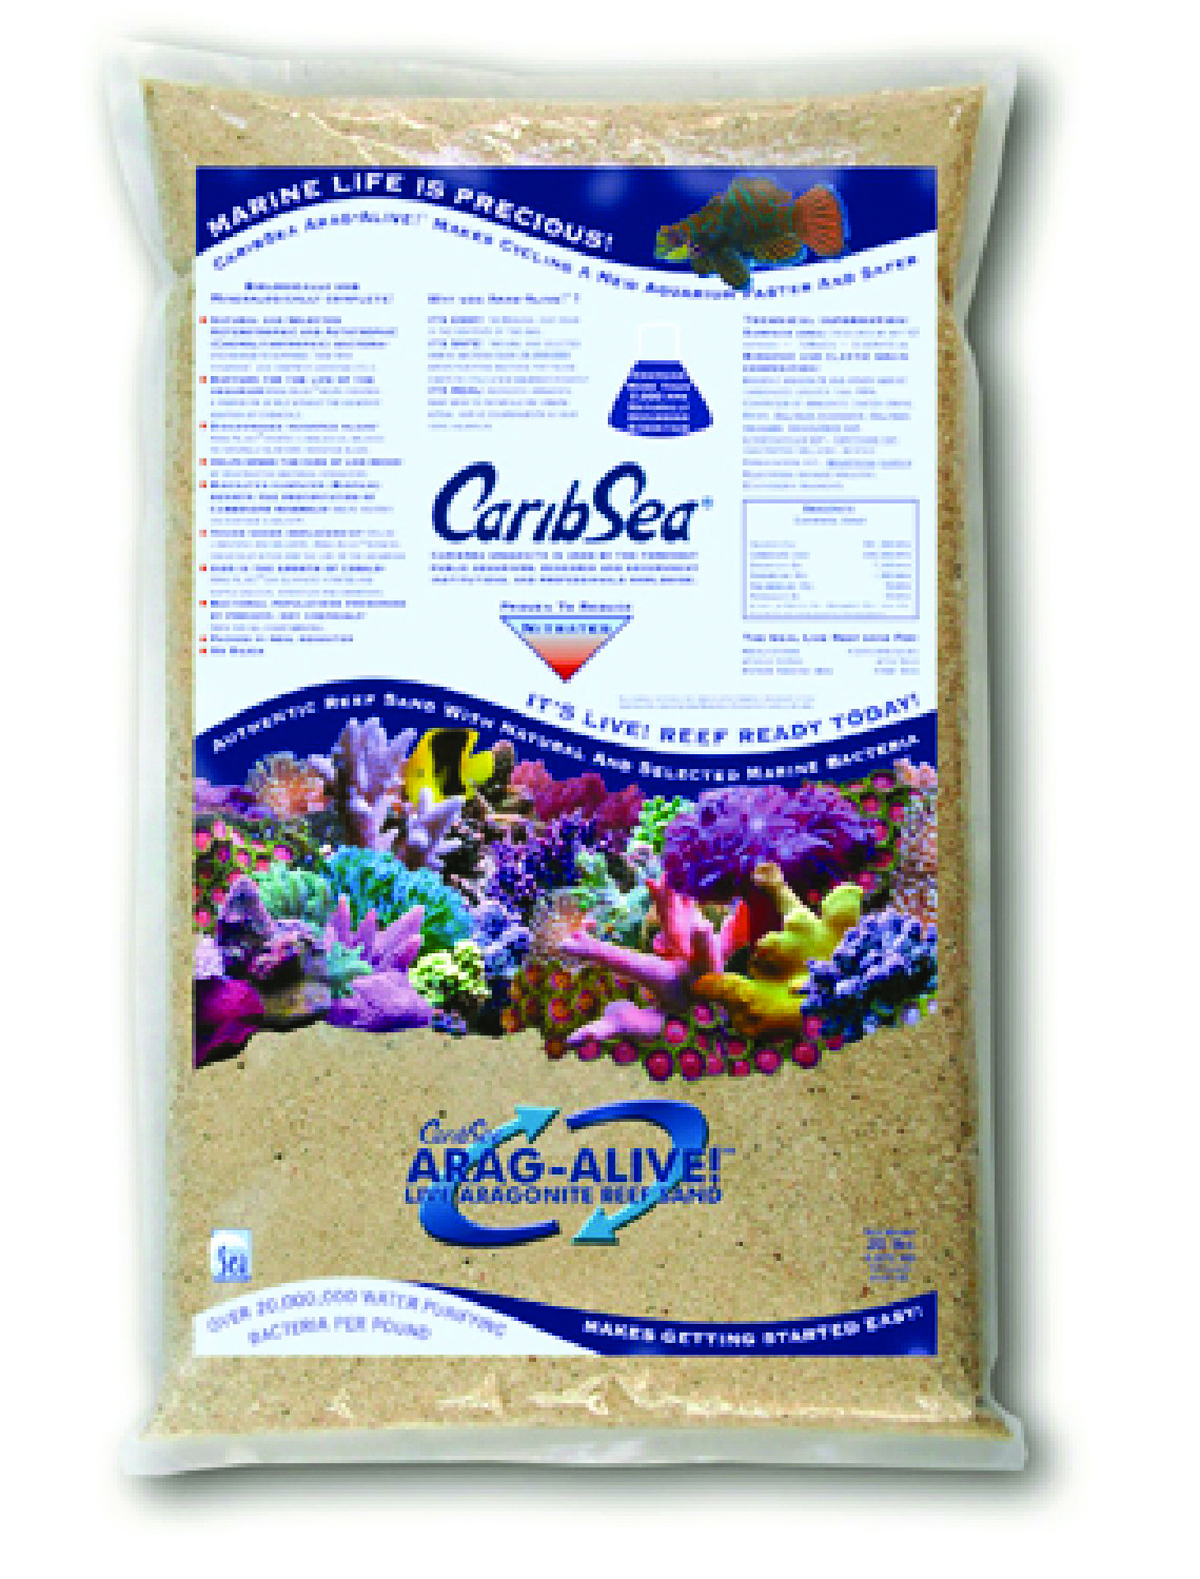 ARAGALIVE INDO-PACIFIC SAND